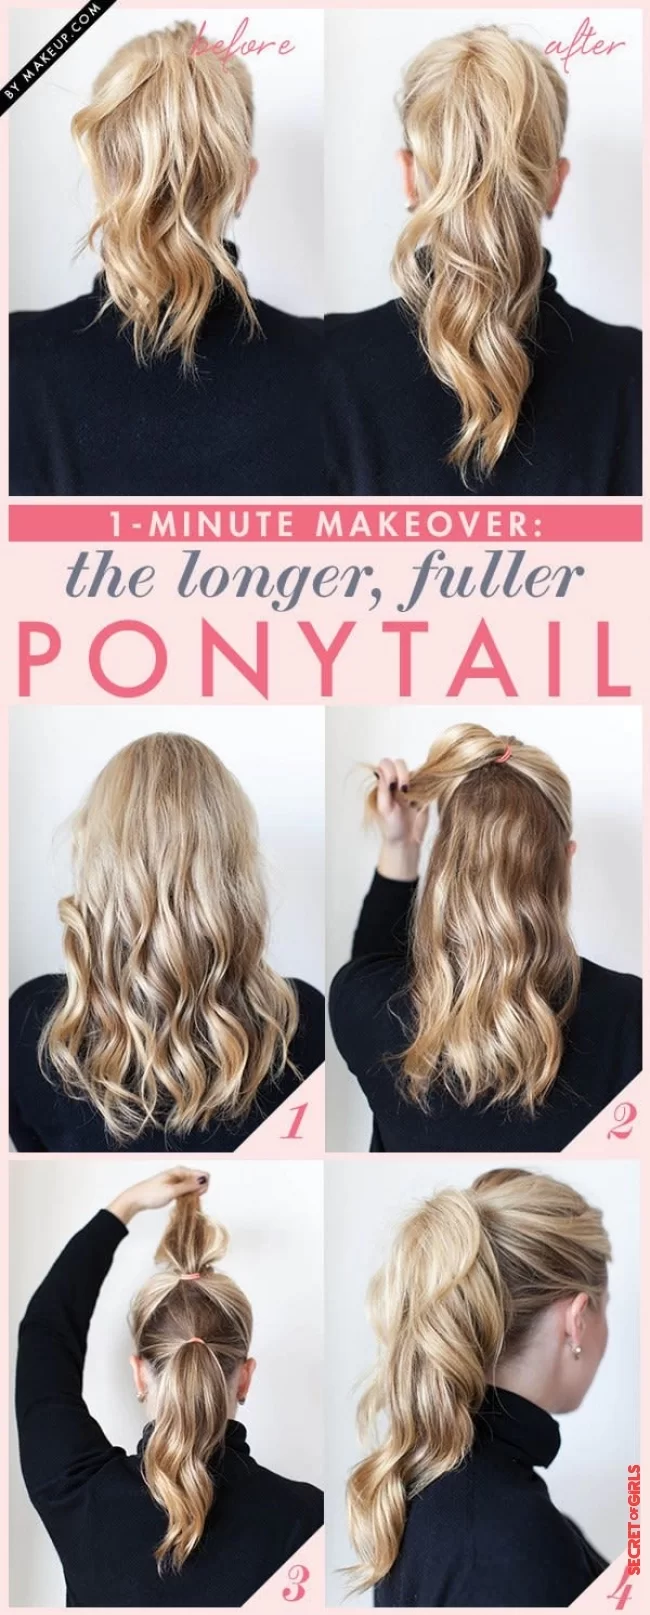 Double ponytail | 7 quick hairstyles for long hair